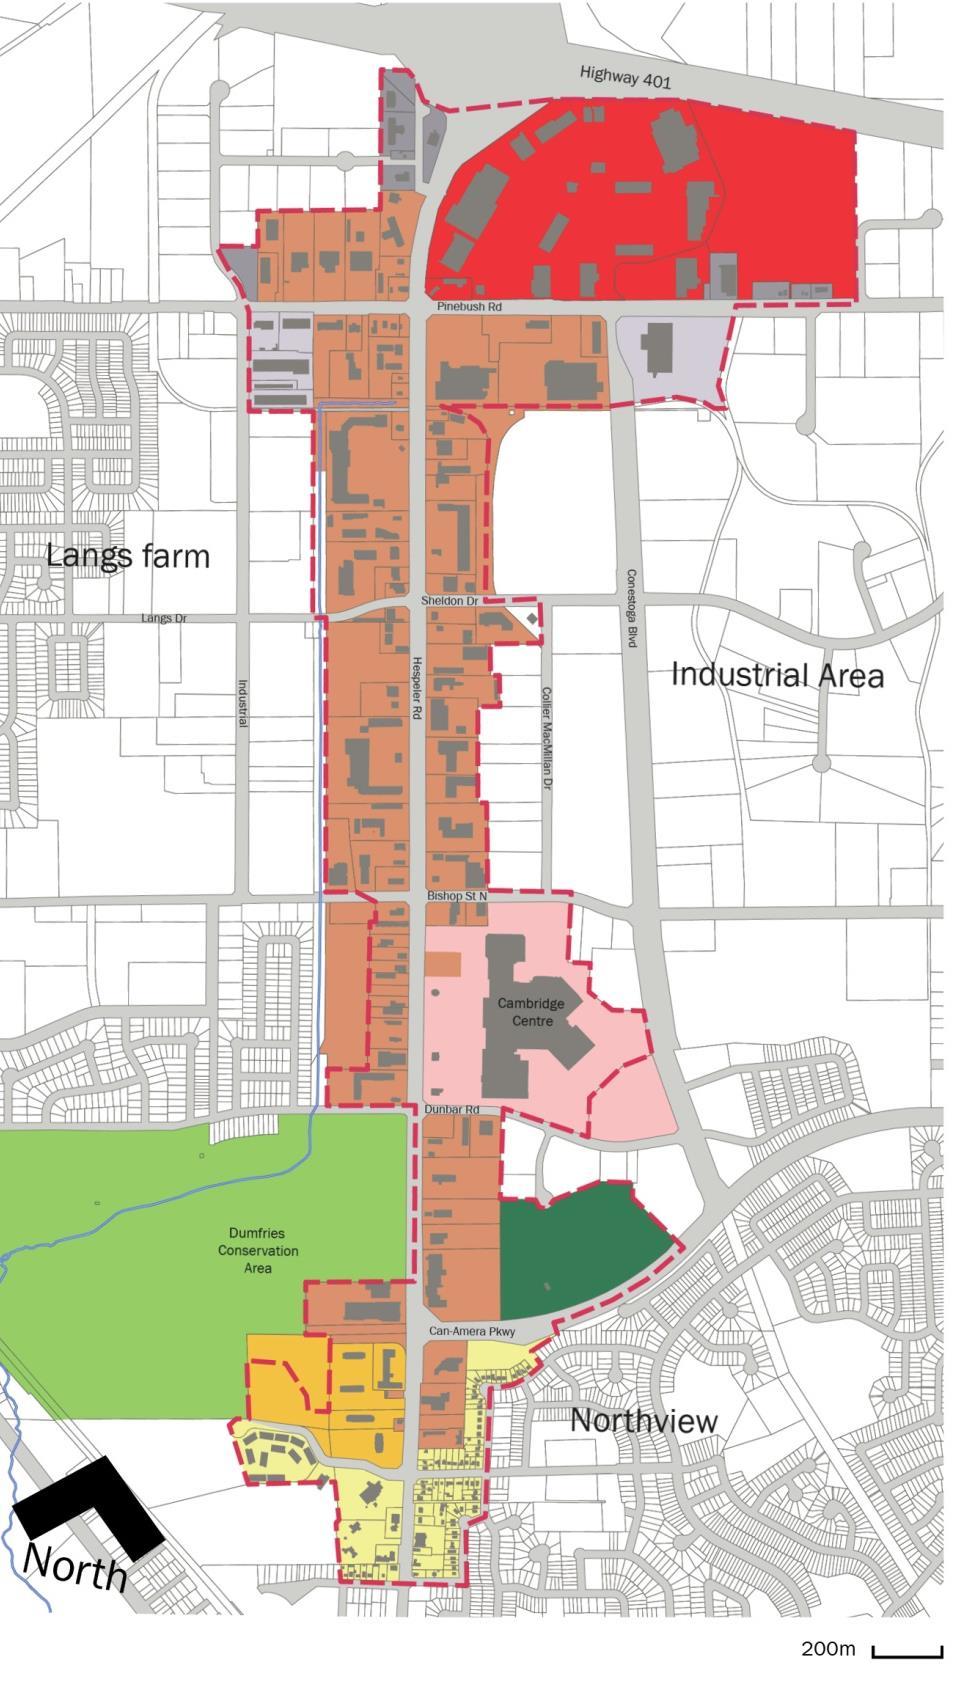 Regeneration Areas are areas within the city where the land use is transitioning from the existing use to another type of use, within a reasonable planning period.